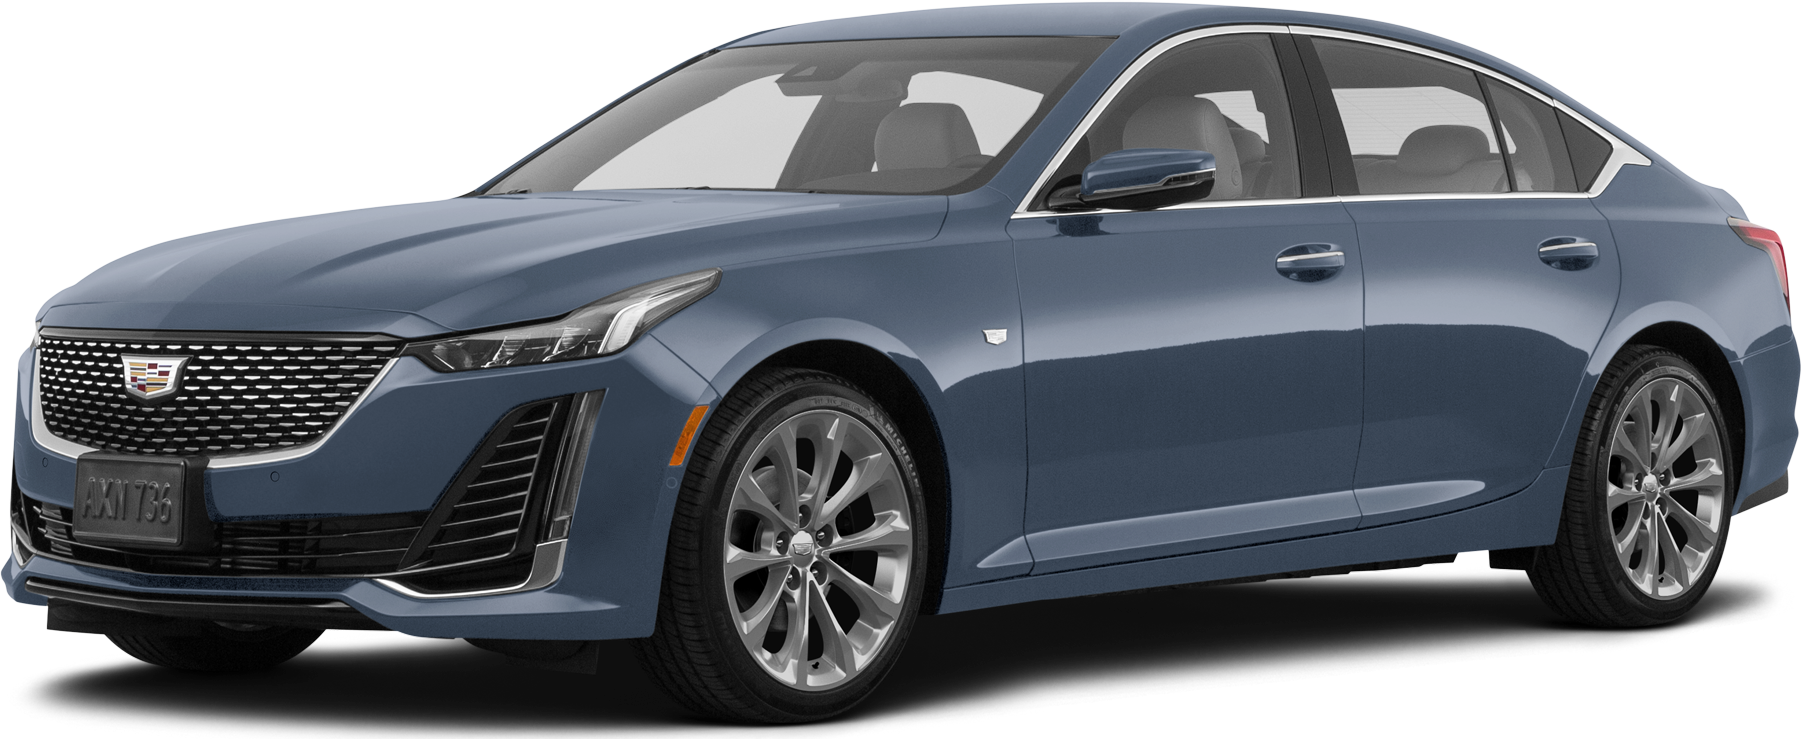 https://file.kelleybluebookimages.com/kbb/base/evox/CP/51217/2024-Cadillac-CT5-front_51217_032_1801x739_GXU_cropped.png